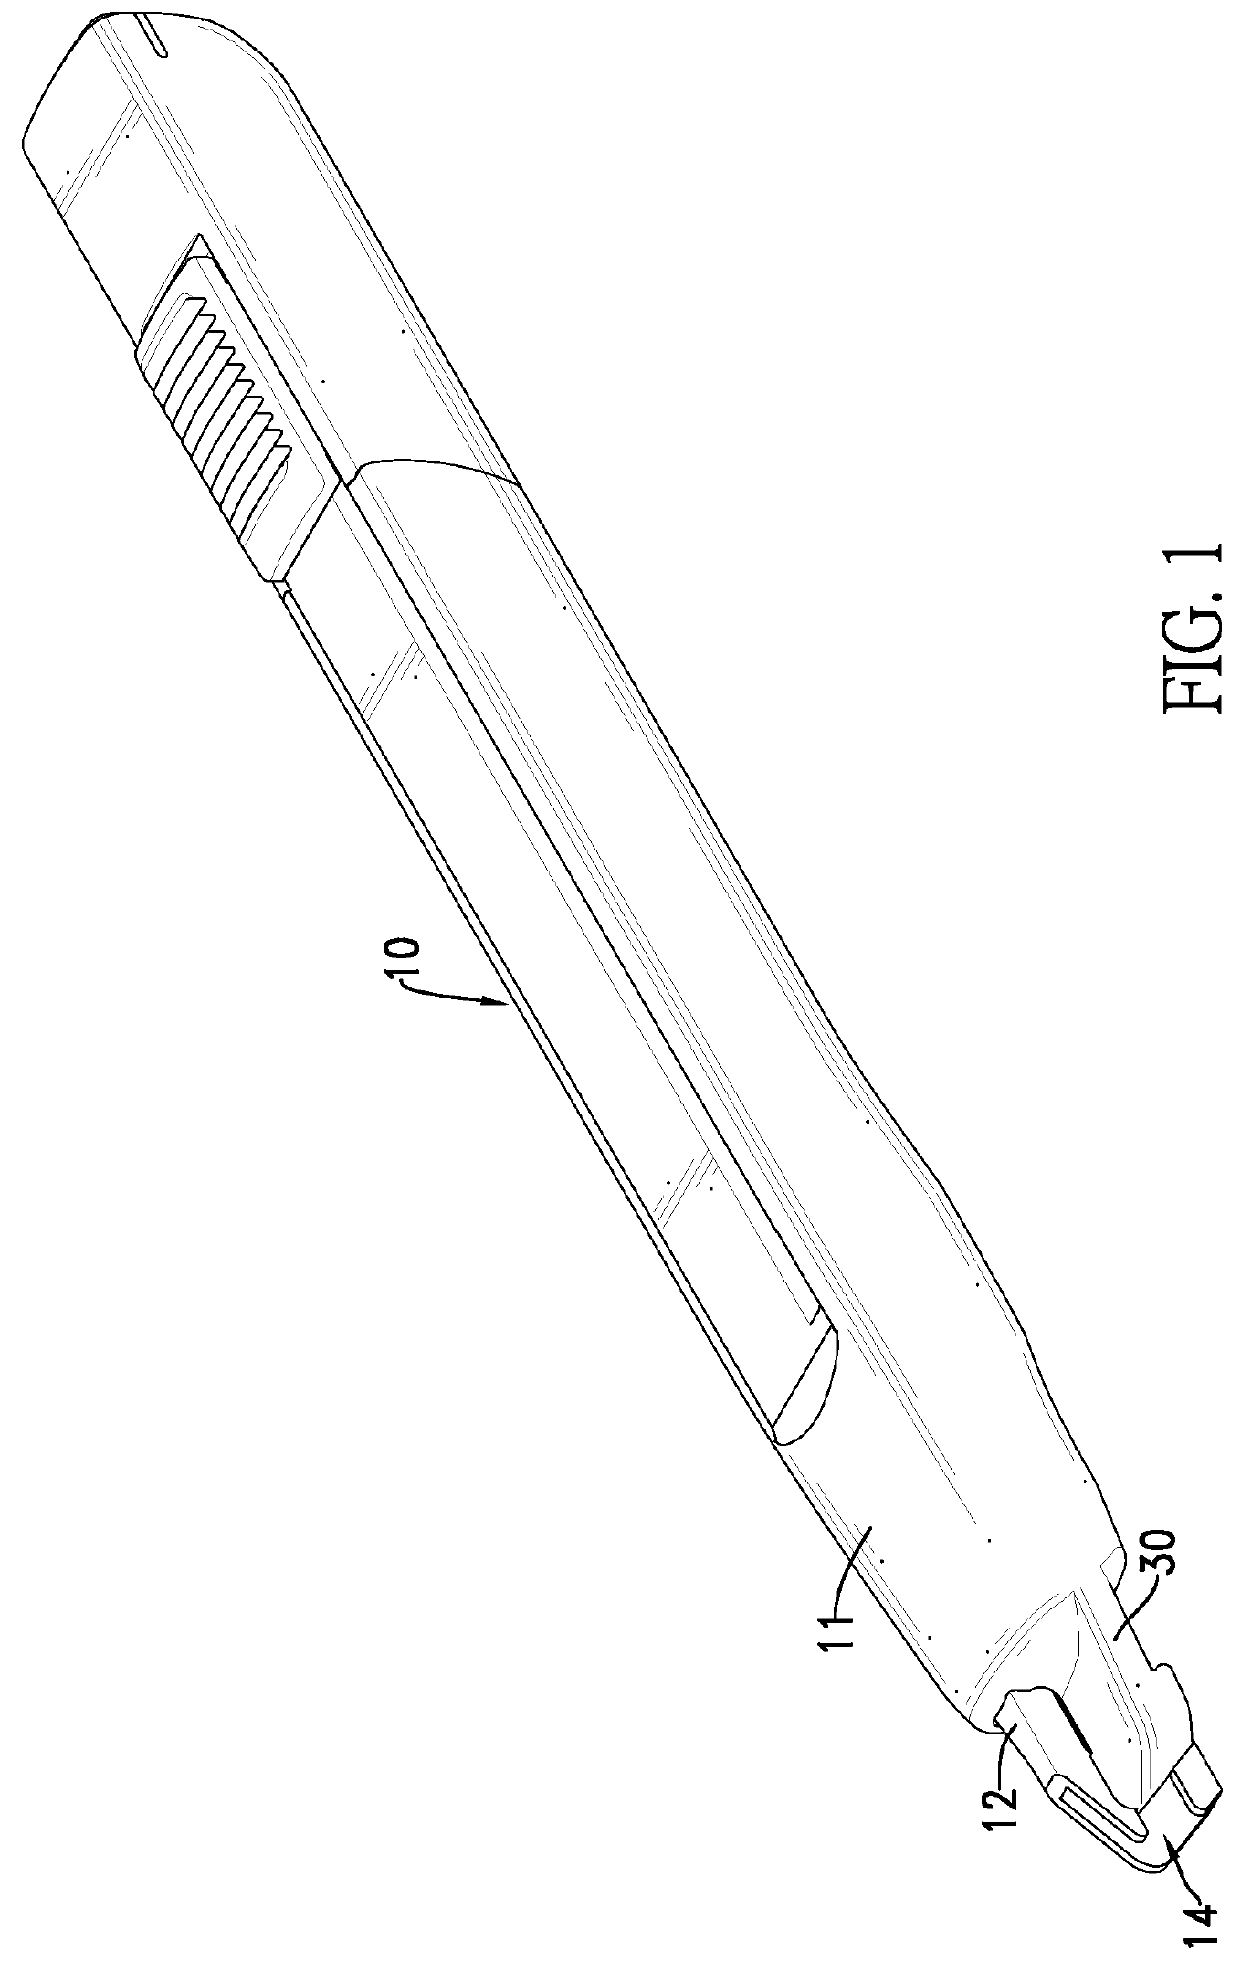 Cutter assembly having a limiting structure